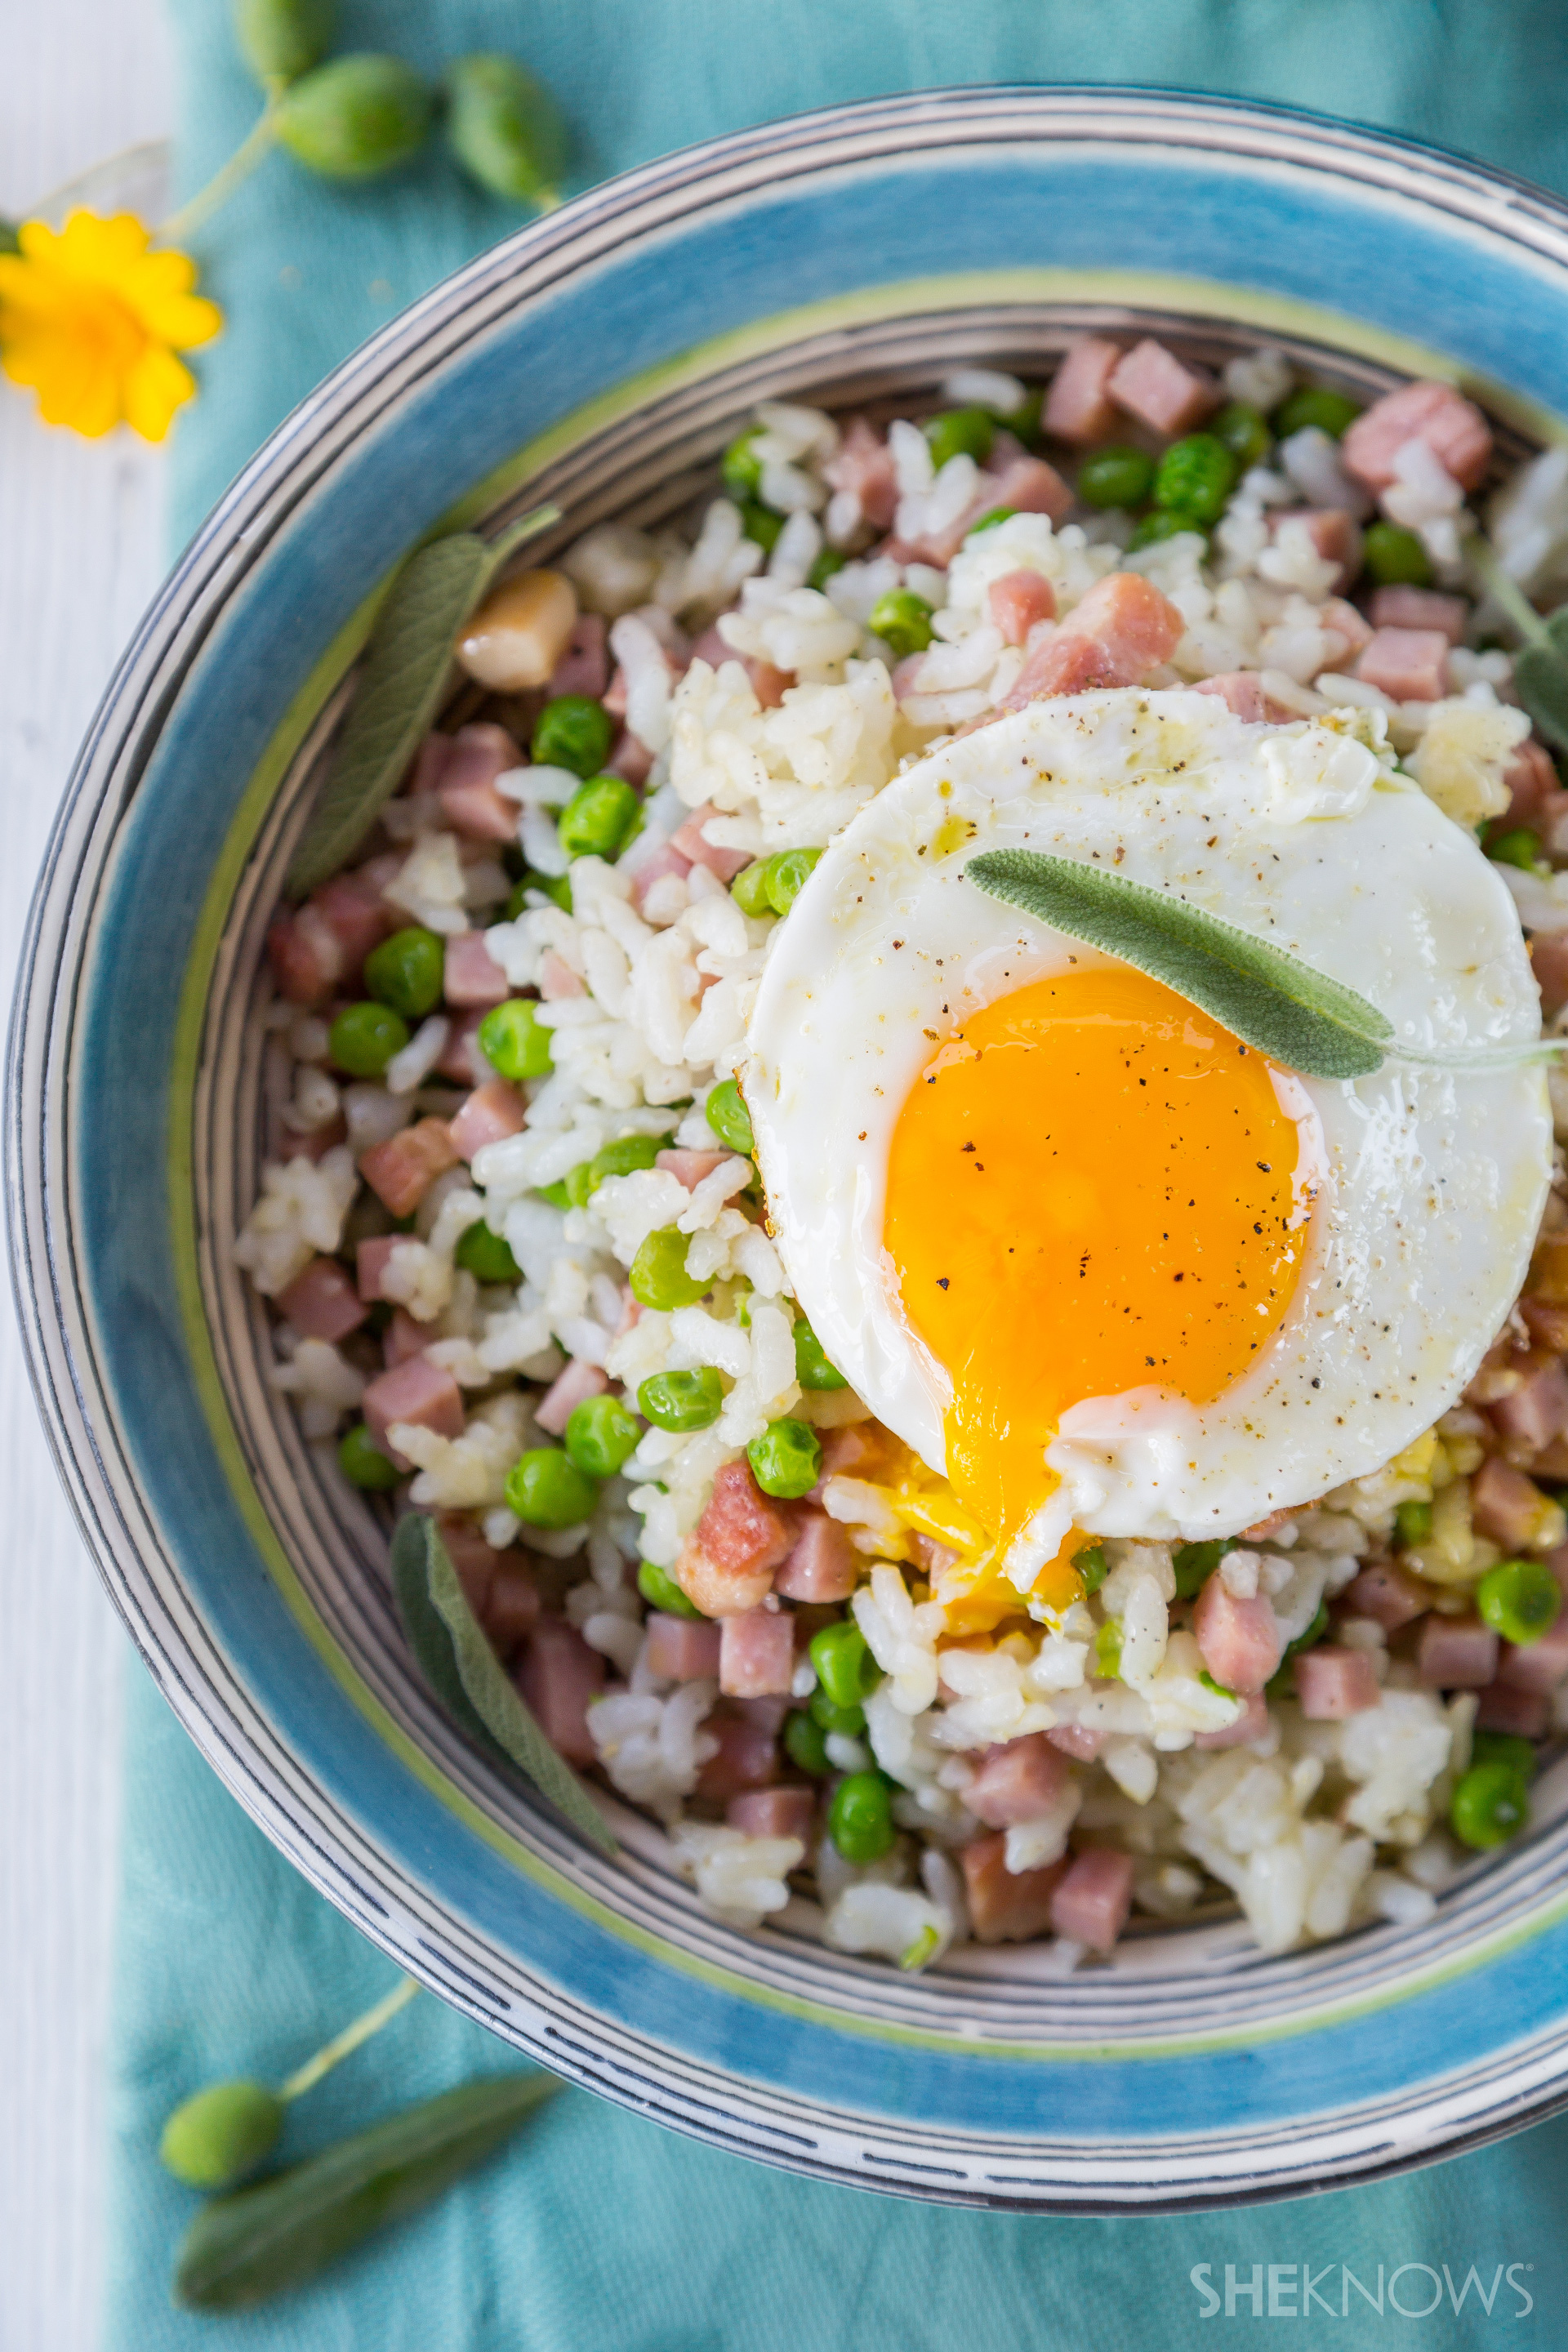 Fried rice for breakfast makes perfect sense when it's loaded with